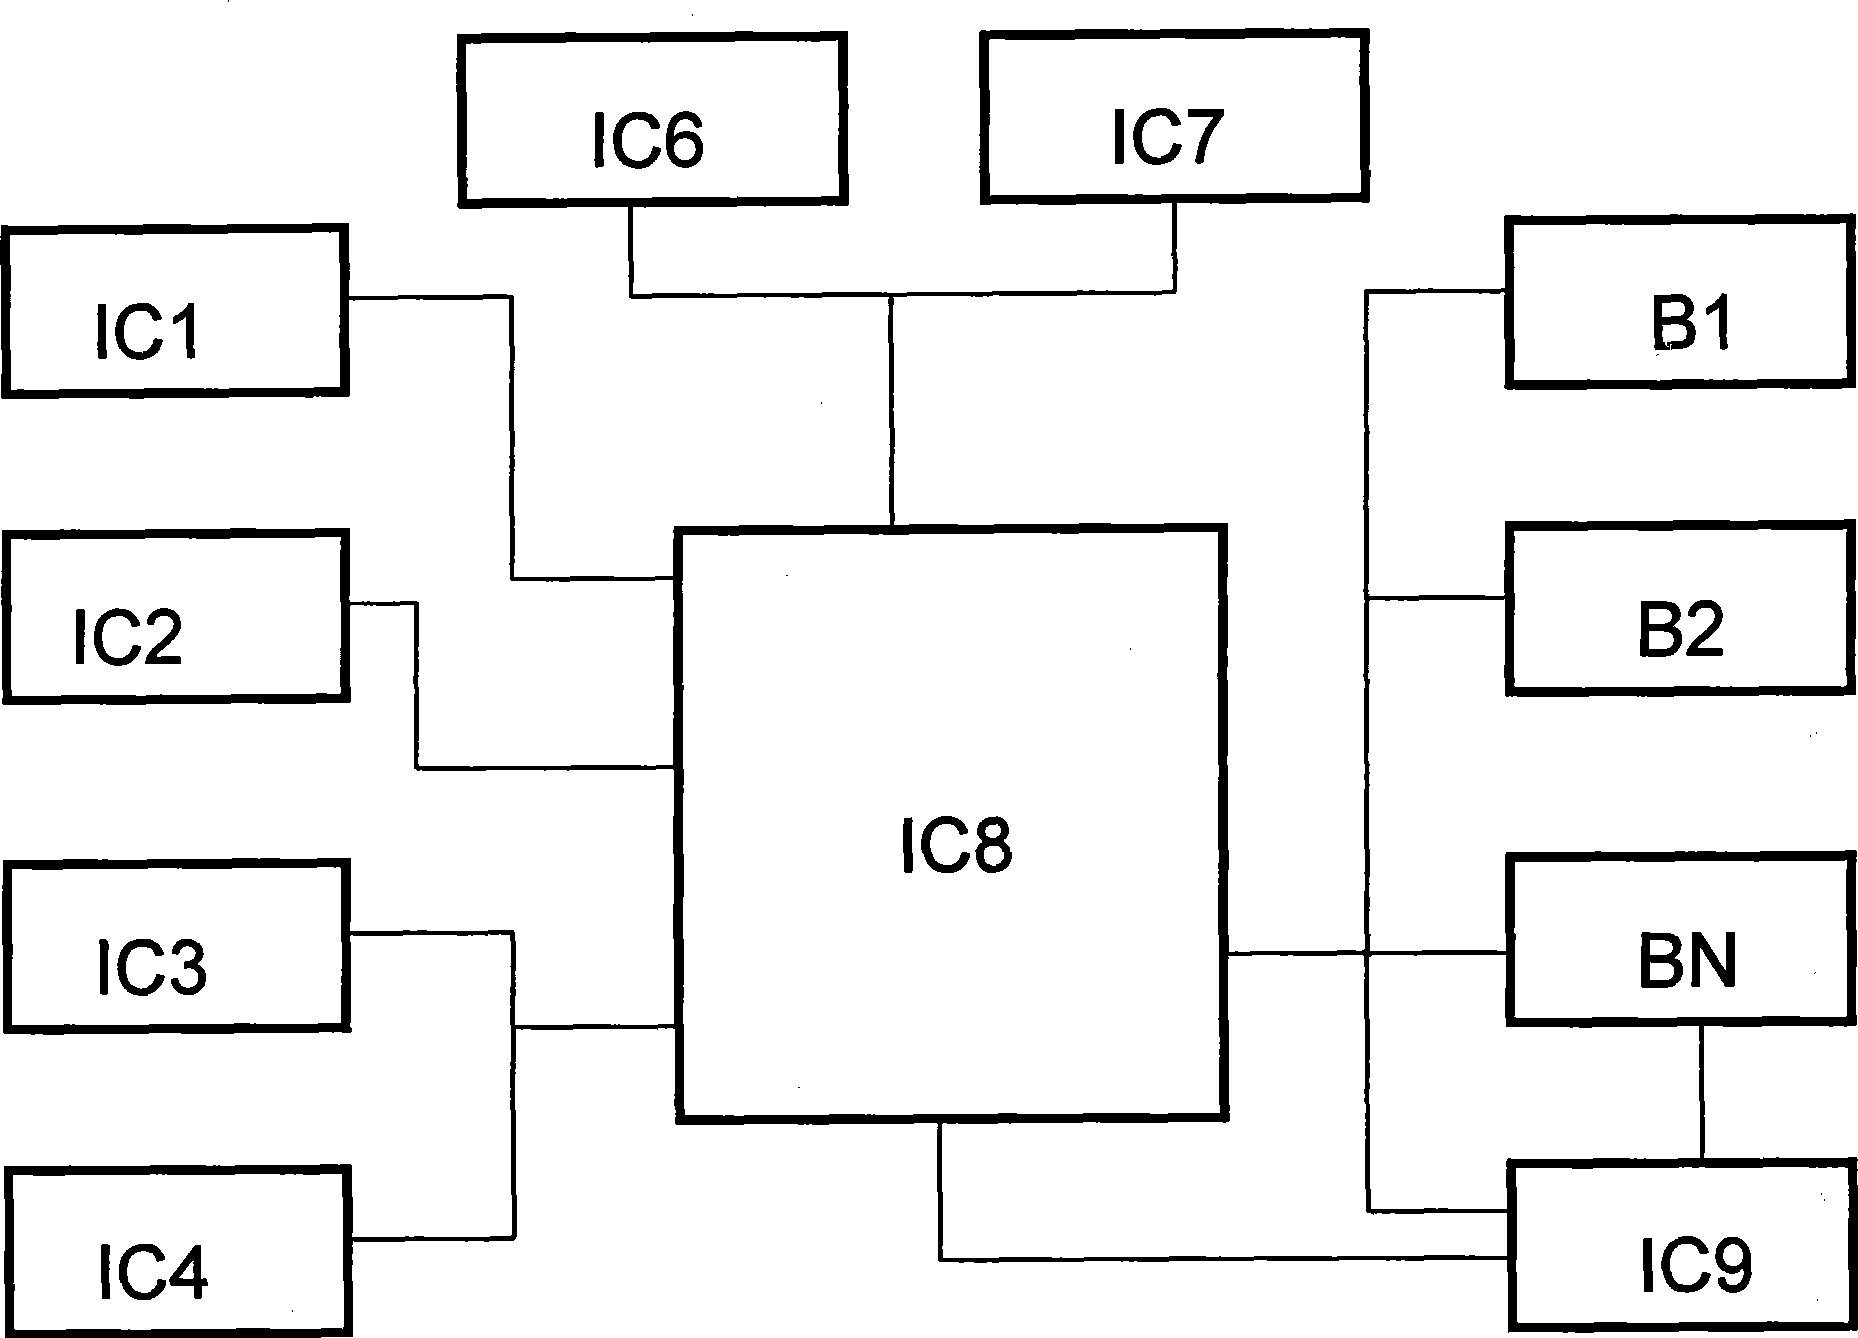 Distributed scheduling communication device